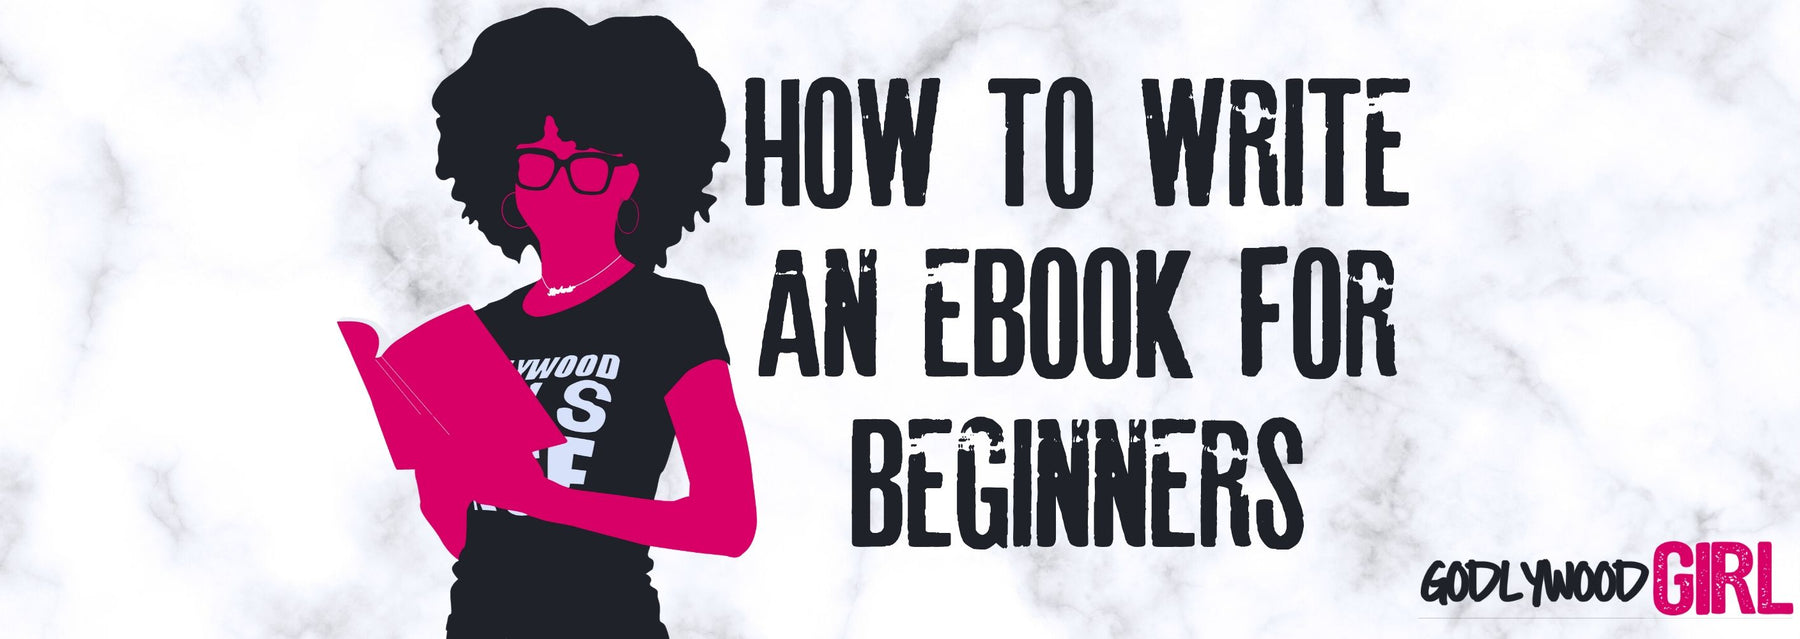 HOW TO WRITE AN EBOOK FOR BEGINNERS | STEPS TO SELF-PUBLISH A BOOK ONLINE (Christian Entrepreneur)